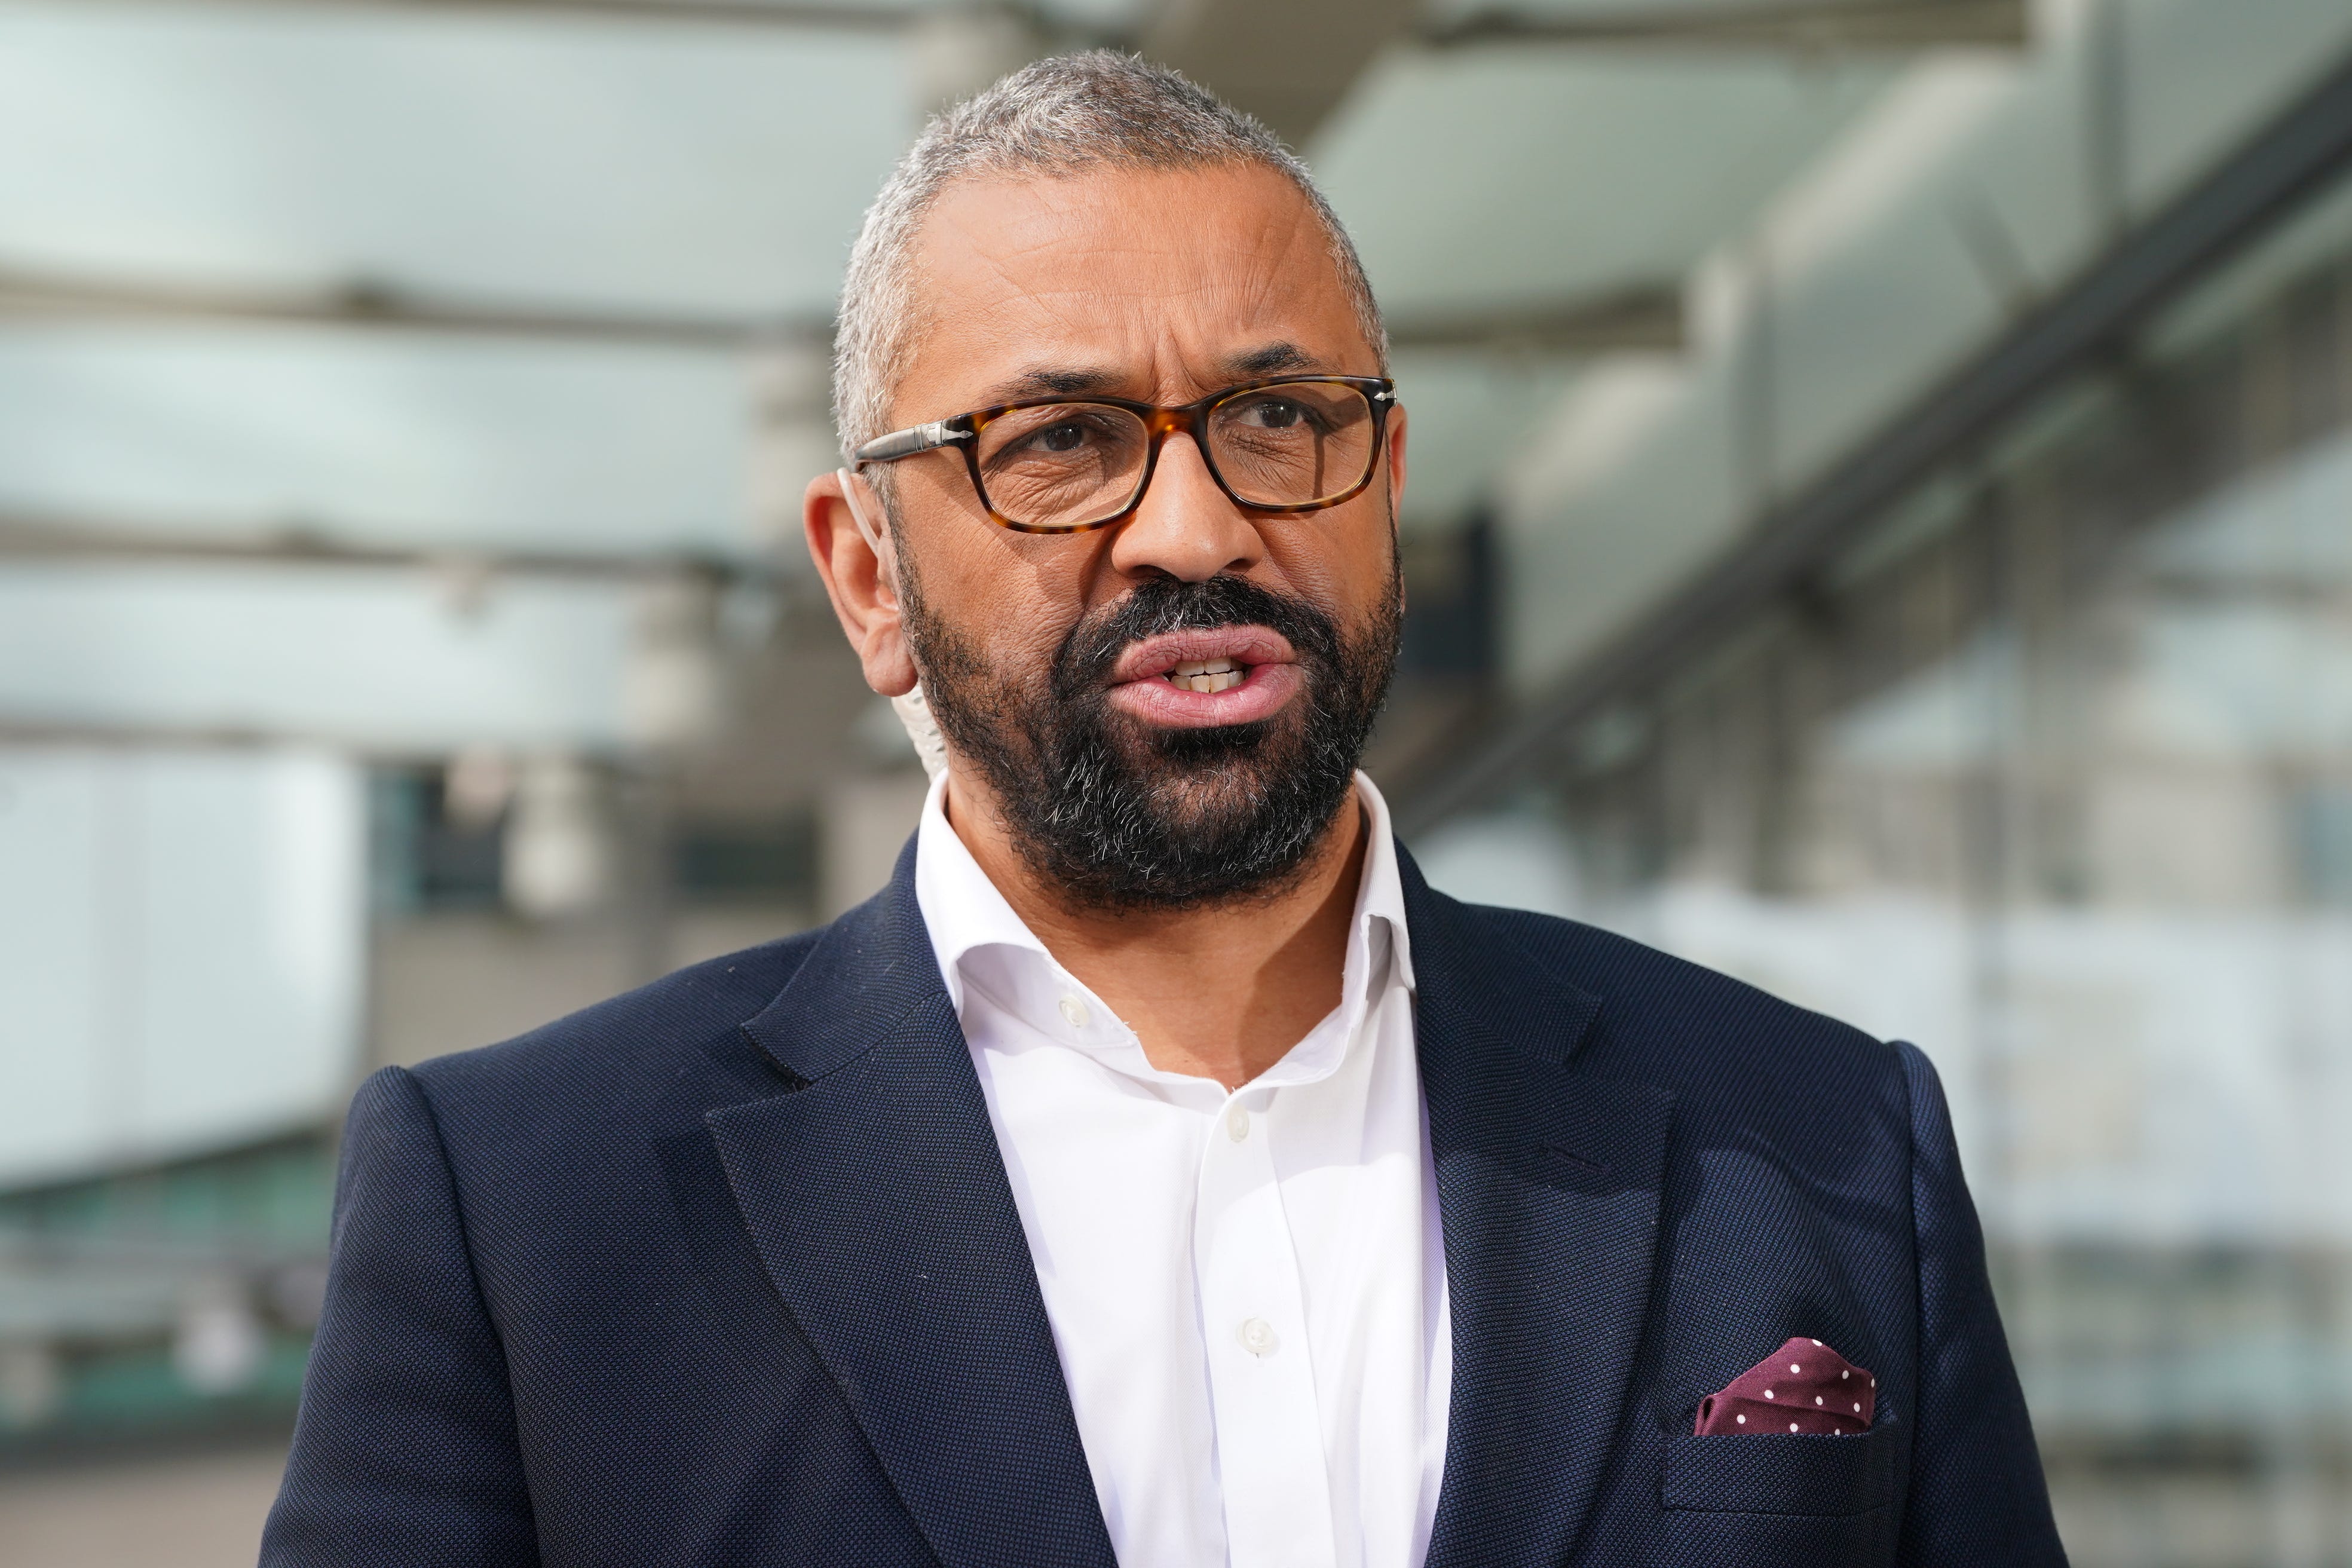 Home Secretary James Cleverly outside BBC Broadcasting House in London, after appearing on the BBC’s Sunday With Laura Kuenssberg programme (Lucy North/PA)